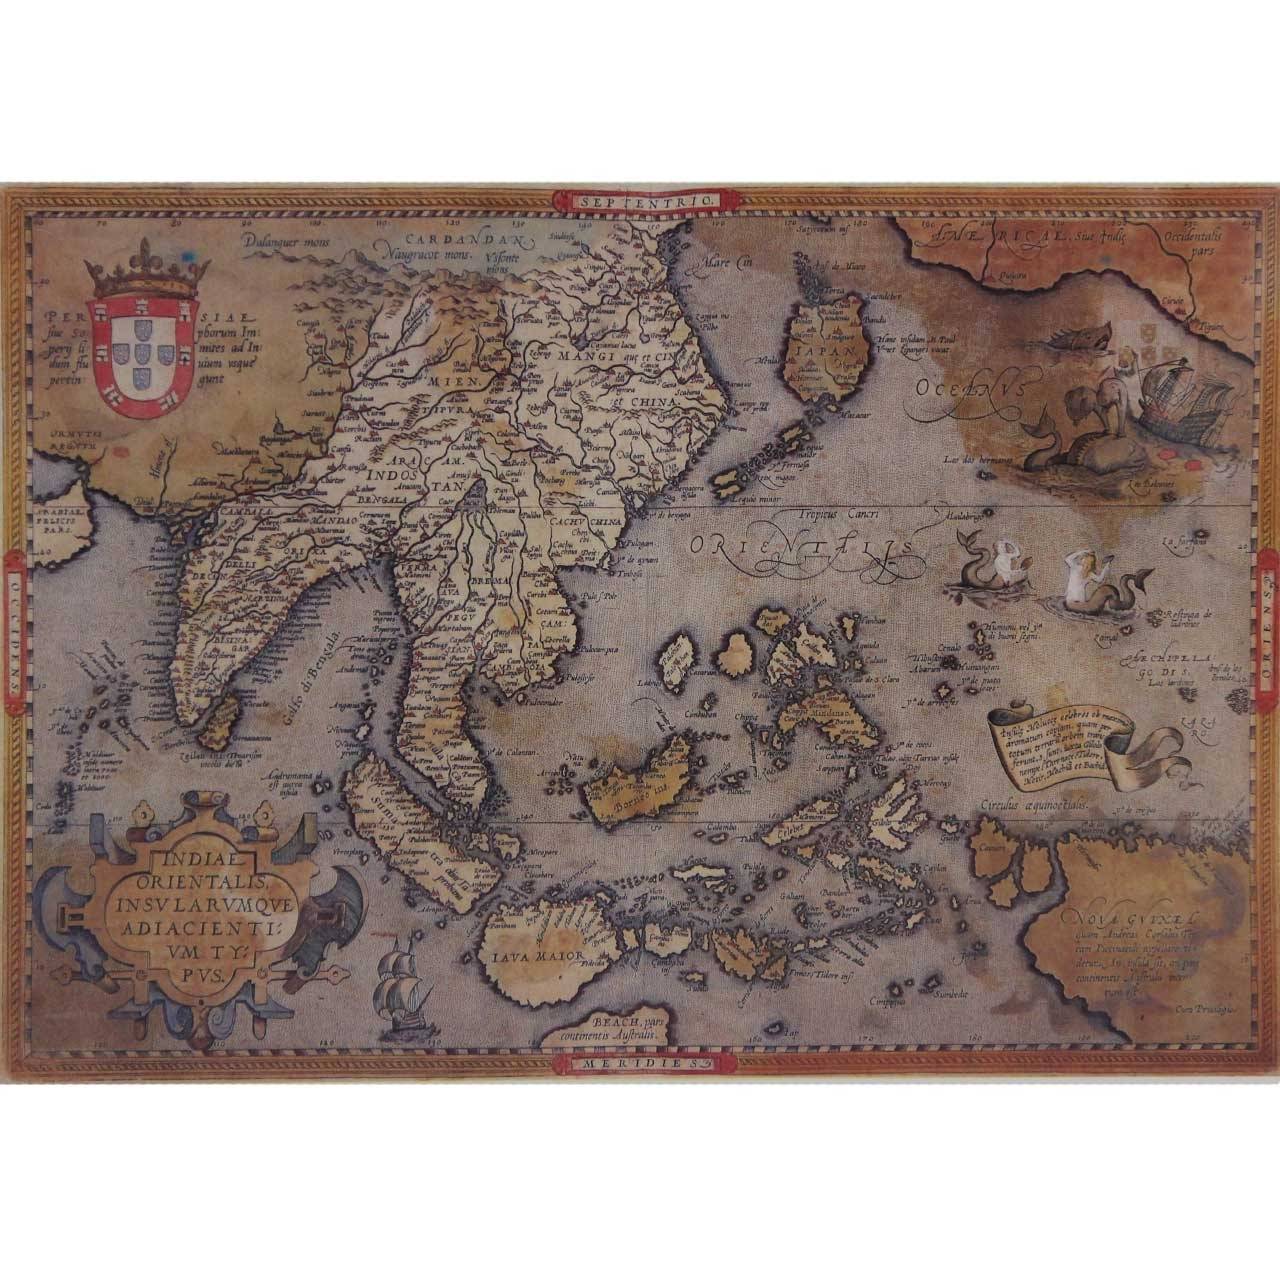 A wonderful assemblage of six map prints reproduced based on antique hand-coloured versions by renowned cartographer Abraham Ortelius (1527 - †1598). Maps are annotated in Latin and include ornate cartouches and charming decorative illustrations